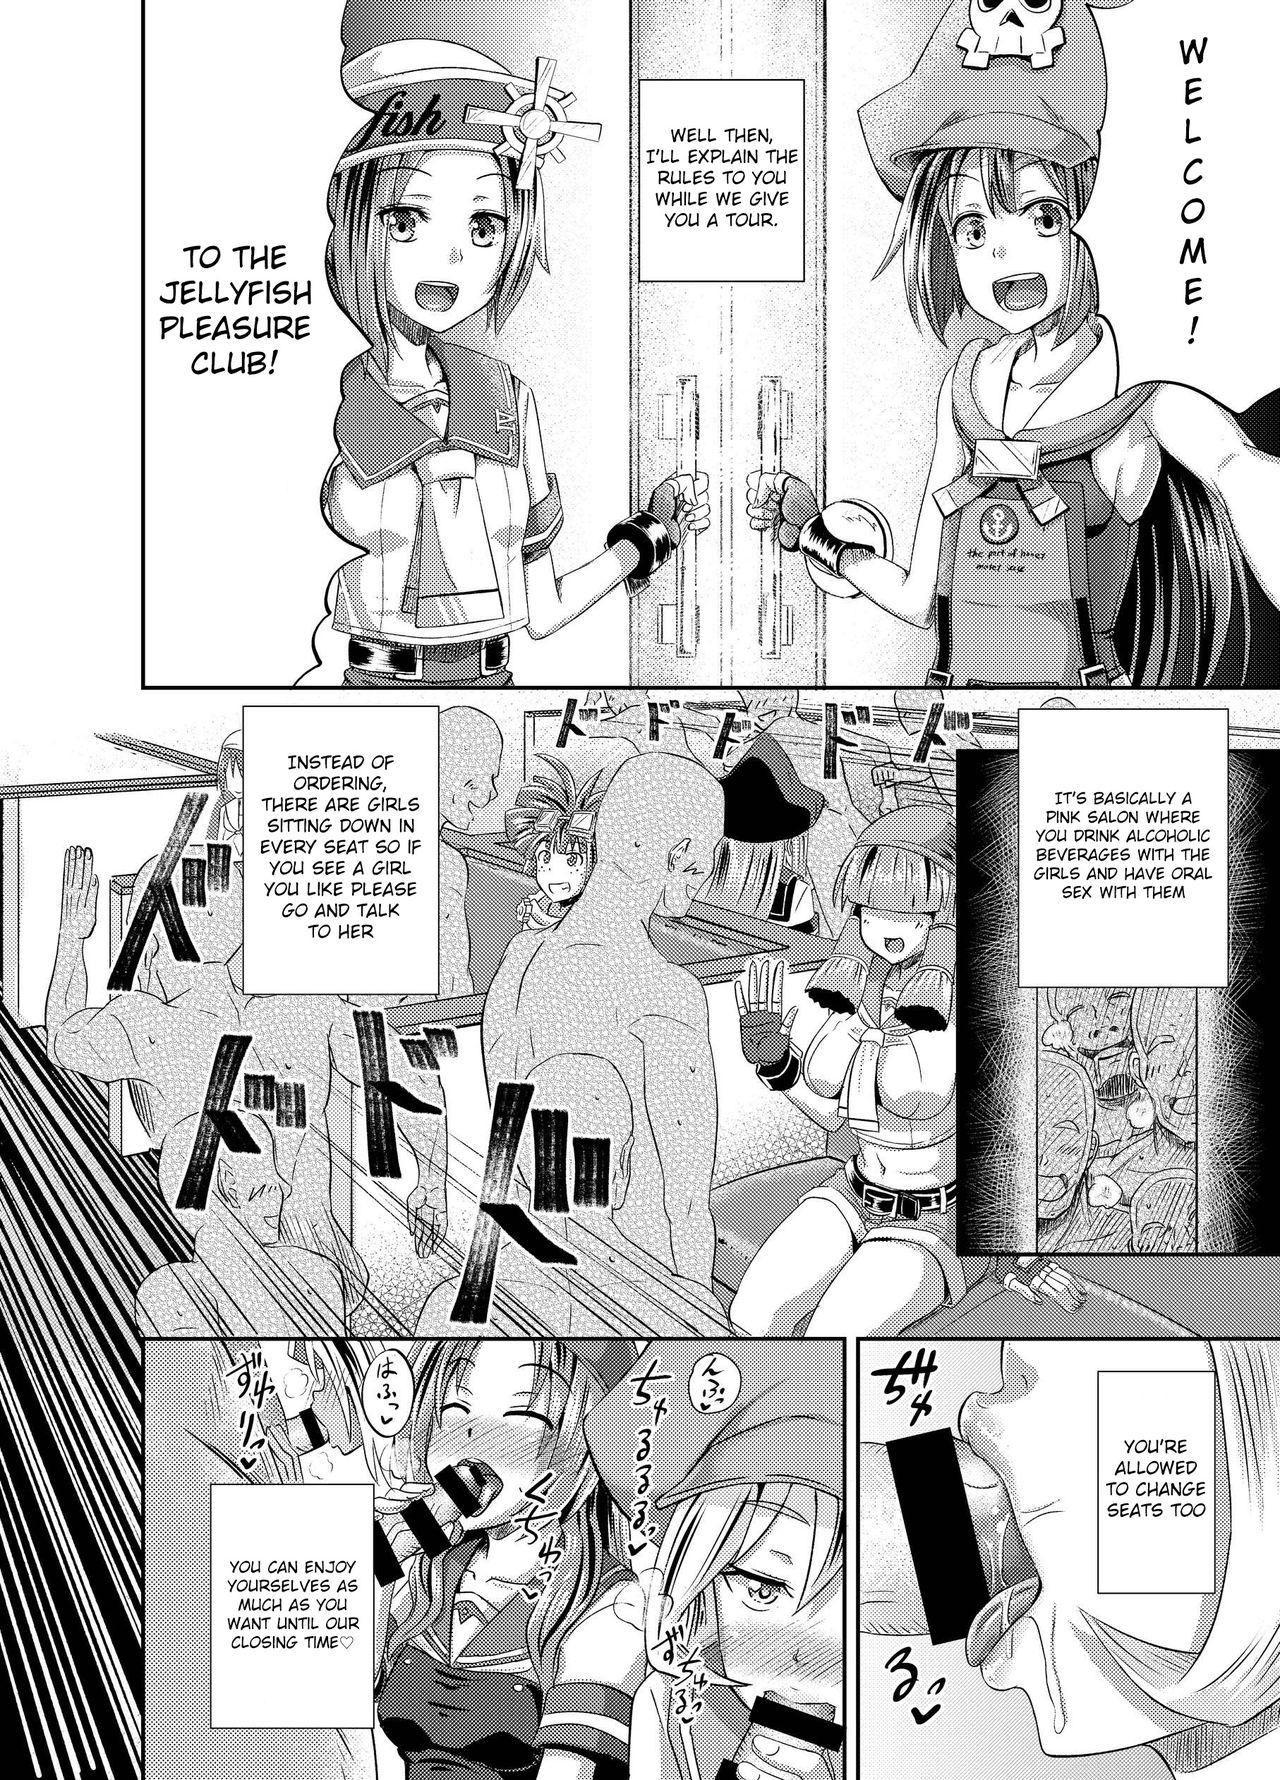 Latinas Jellyfish Kaizokudan e Youkoso! | Welcome to The Jellyfish Pleasure Club! - Guilty gear Massive - Page 3